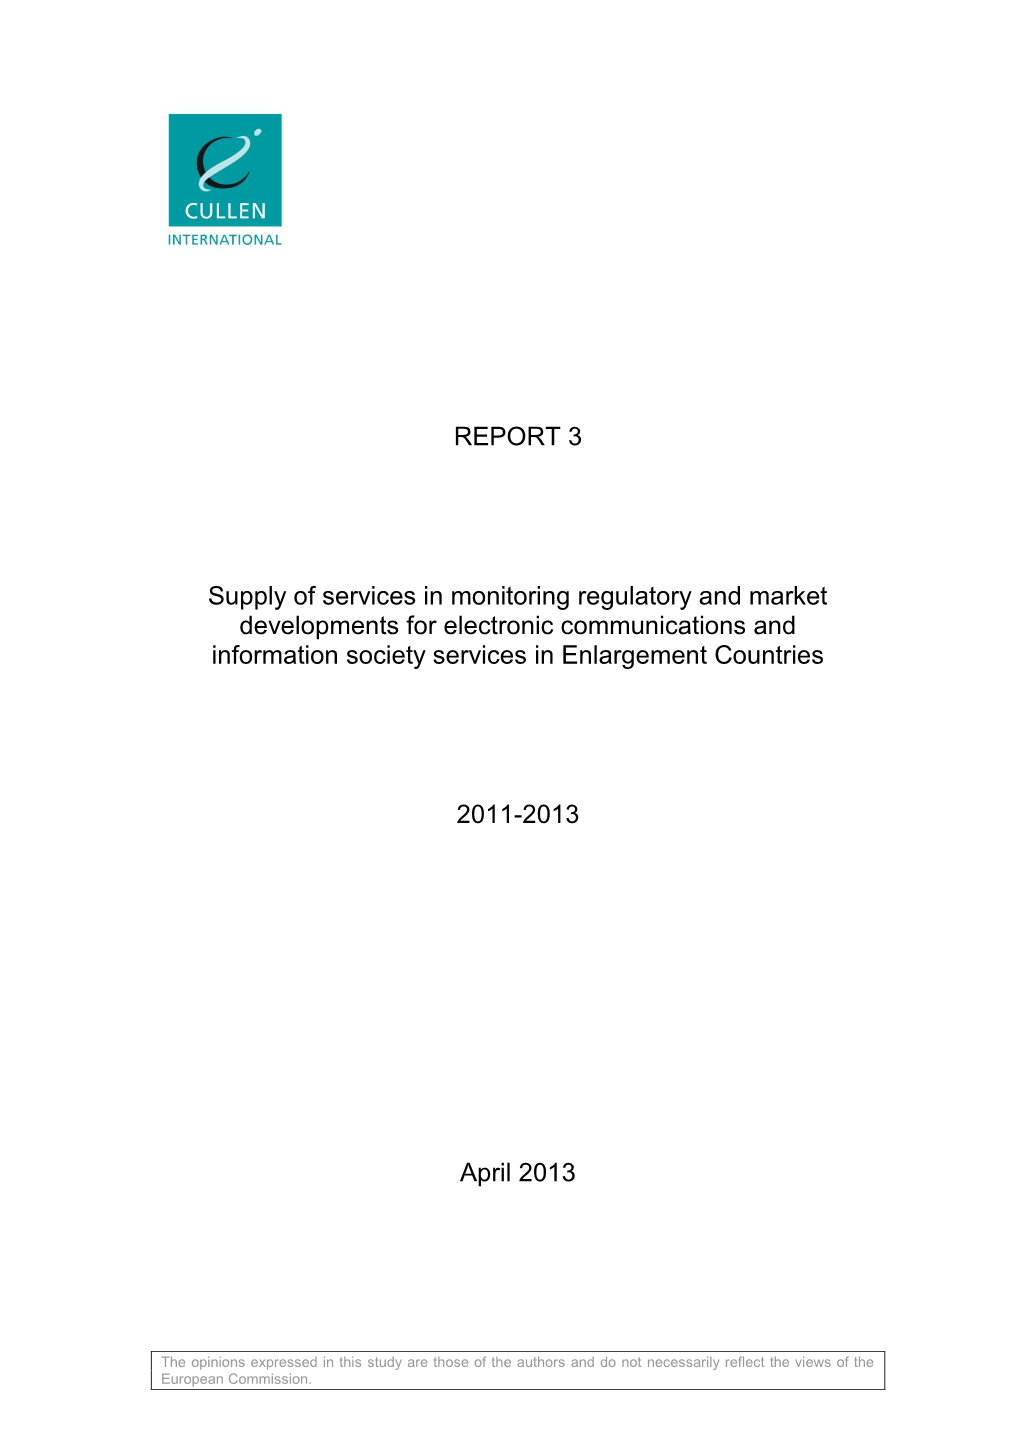 REPORT 3 Supply of Services in Monitoring Regulatory and Market